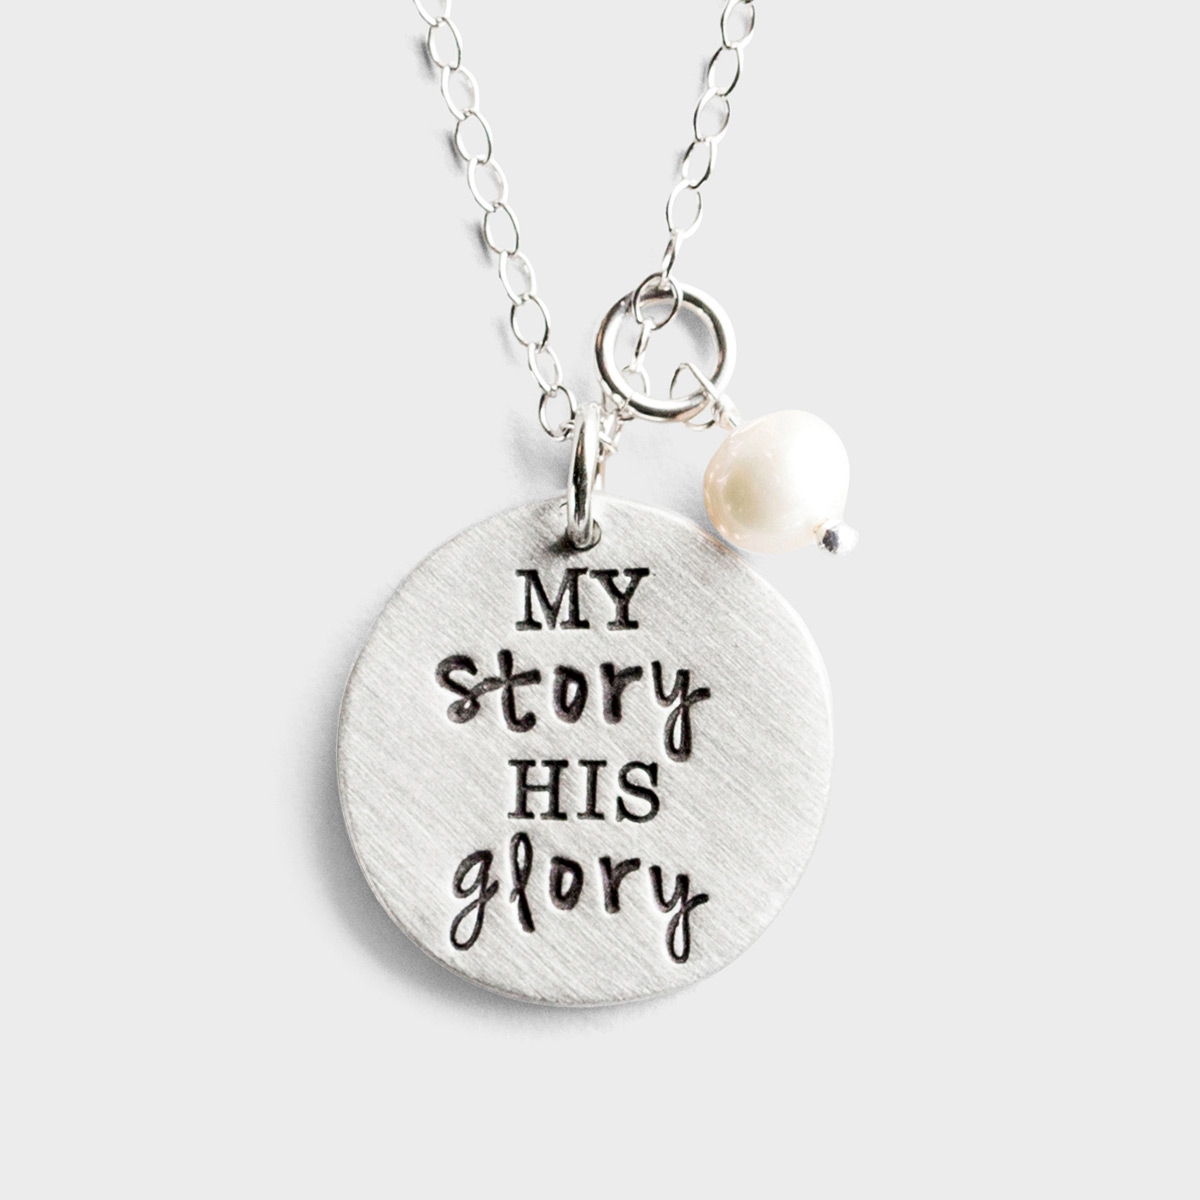 My Story His Glory - Pewter Pendant Necklace